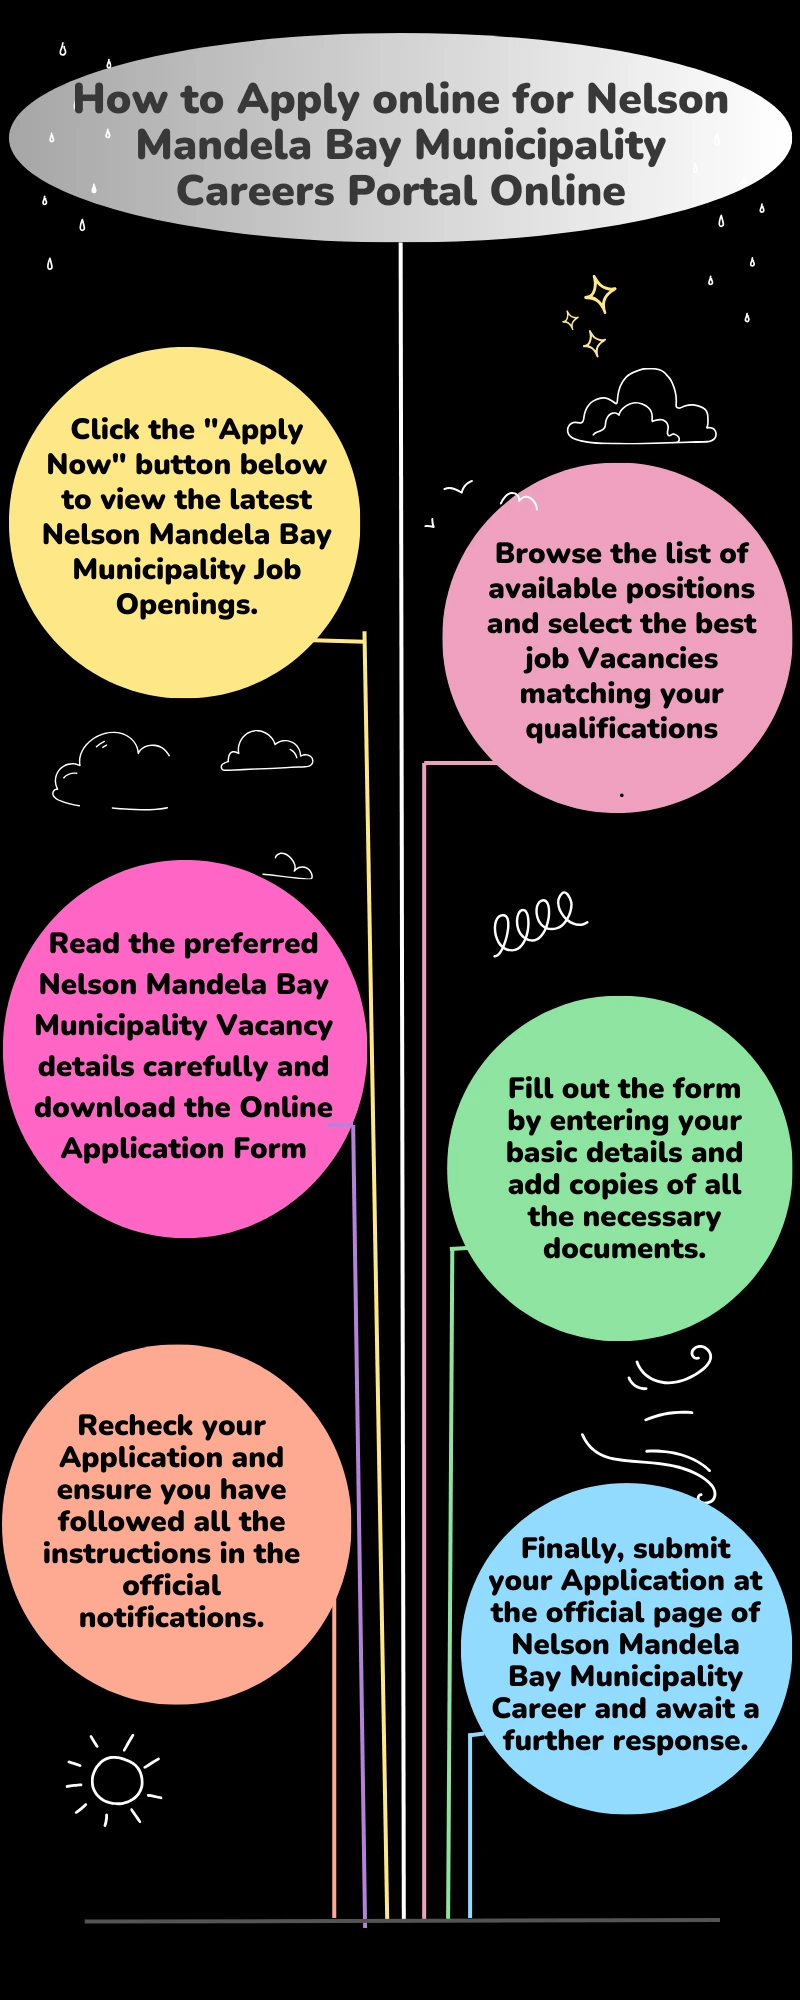 How to Apply online for Nelson Mandela Bay Municipality Careers Portal Online